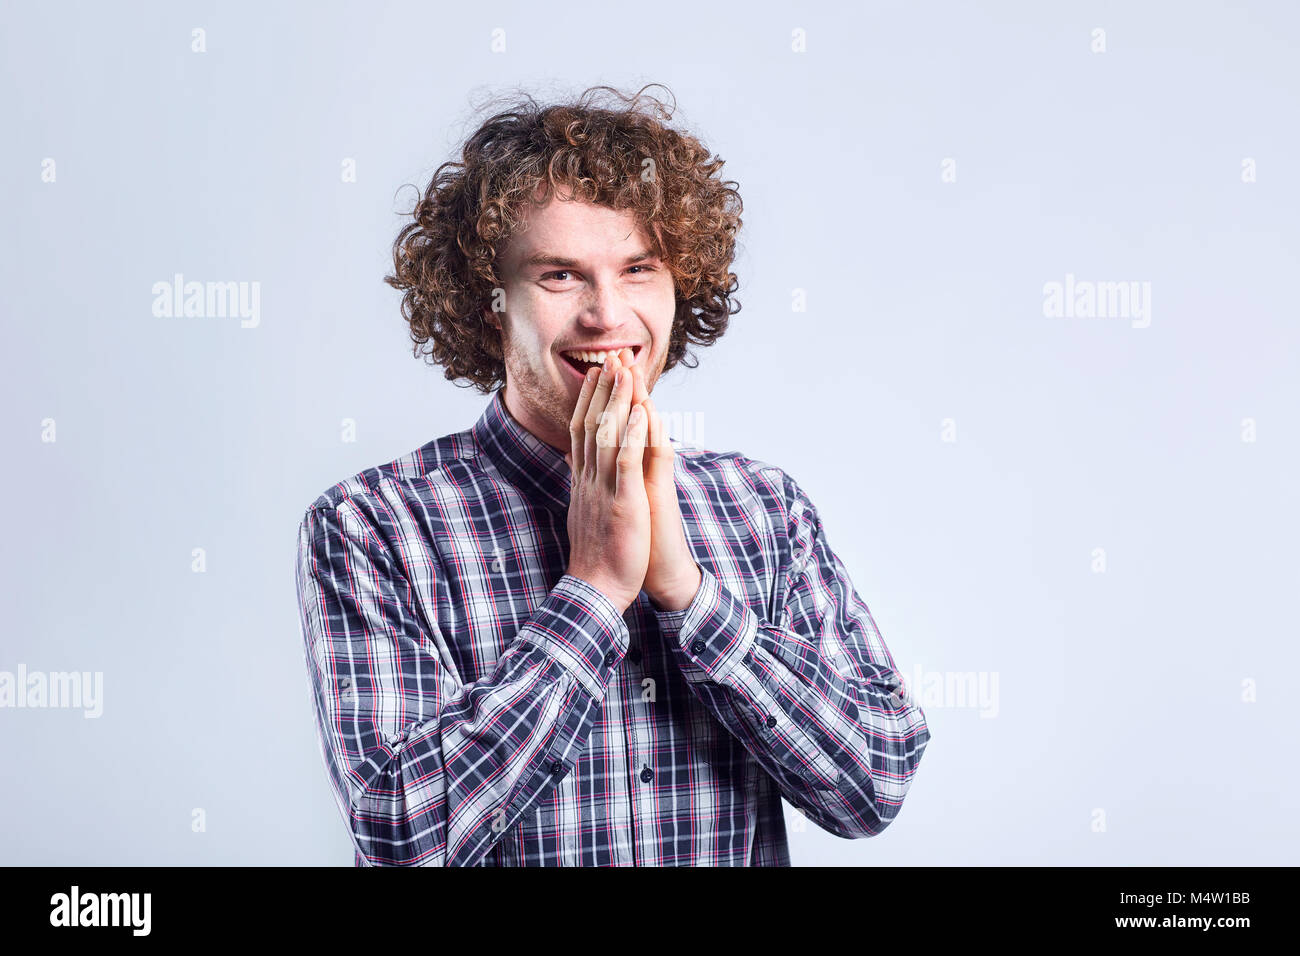 Curly-haired guy surprised rejoices with a positive emotion. Stock Photo